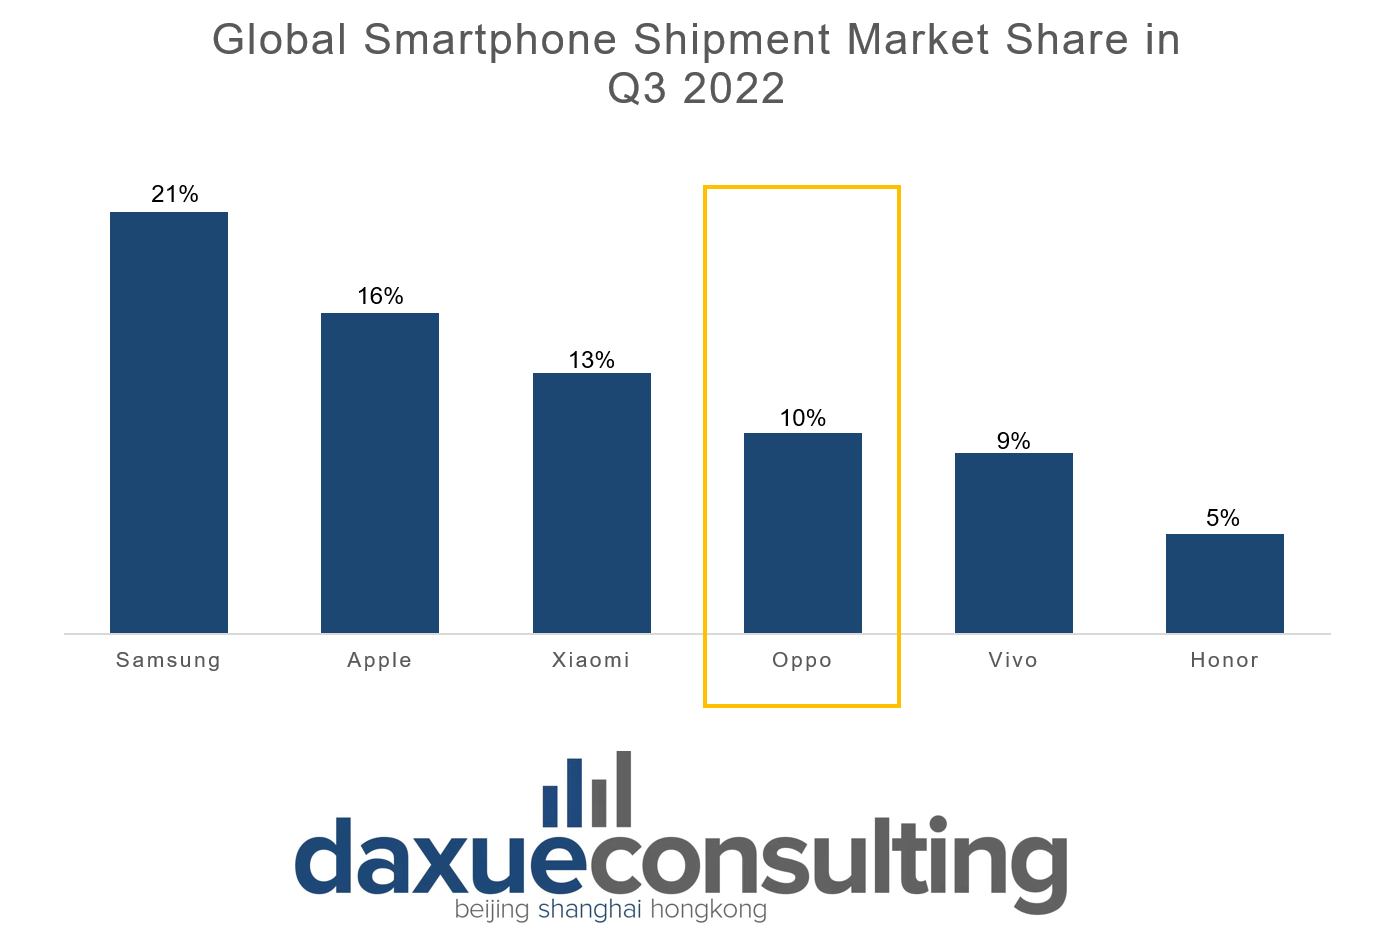 Oppo ranks 4th among global smartphone manufacturers